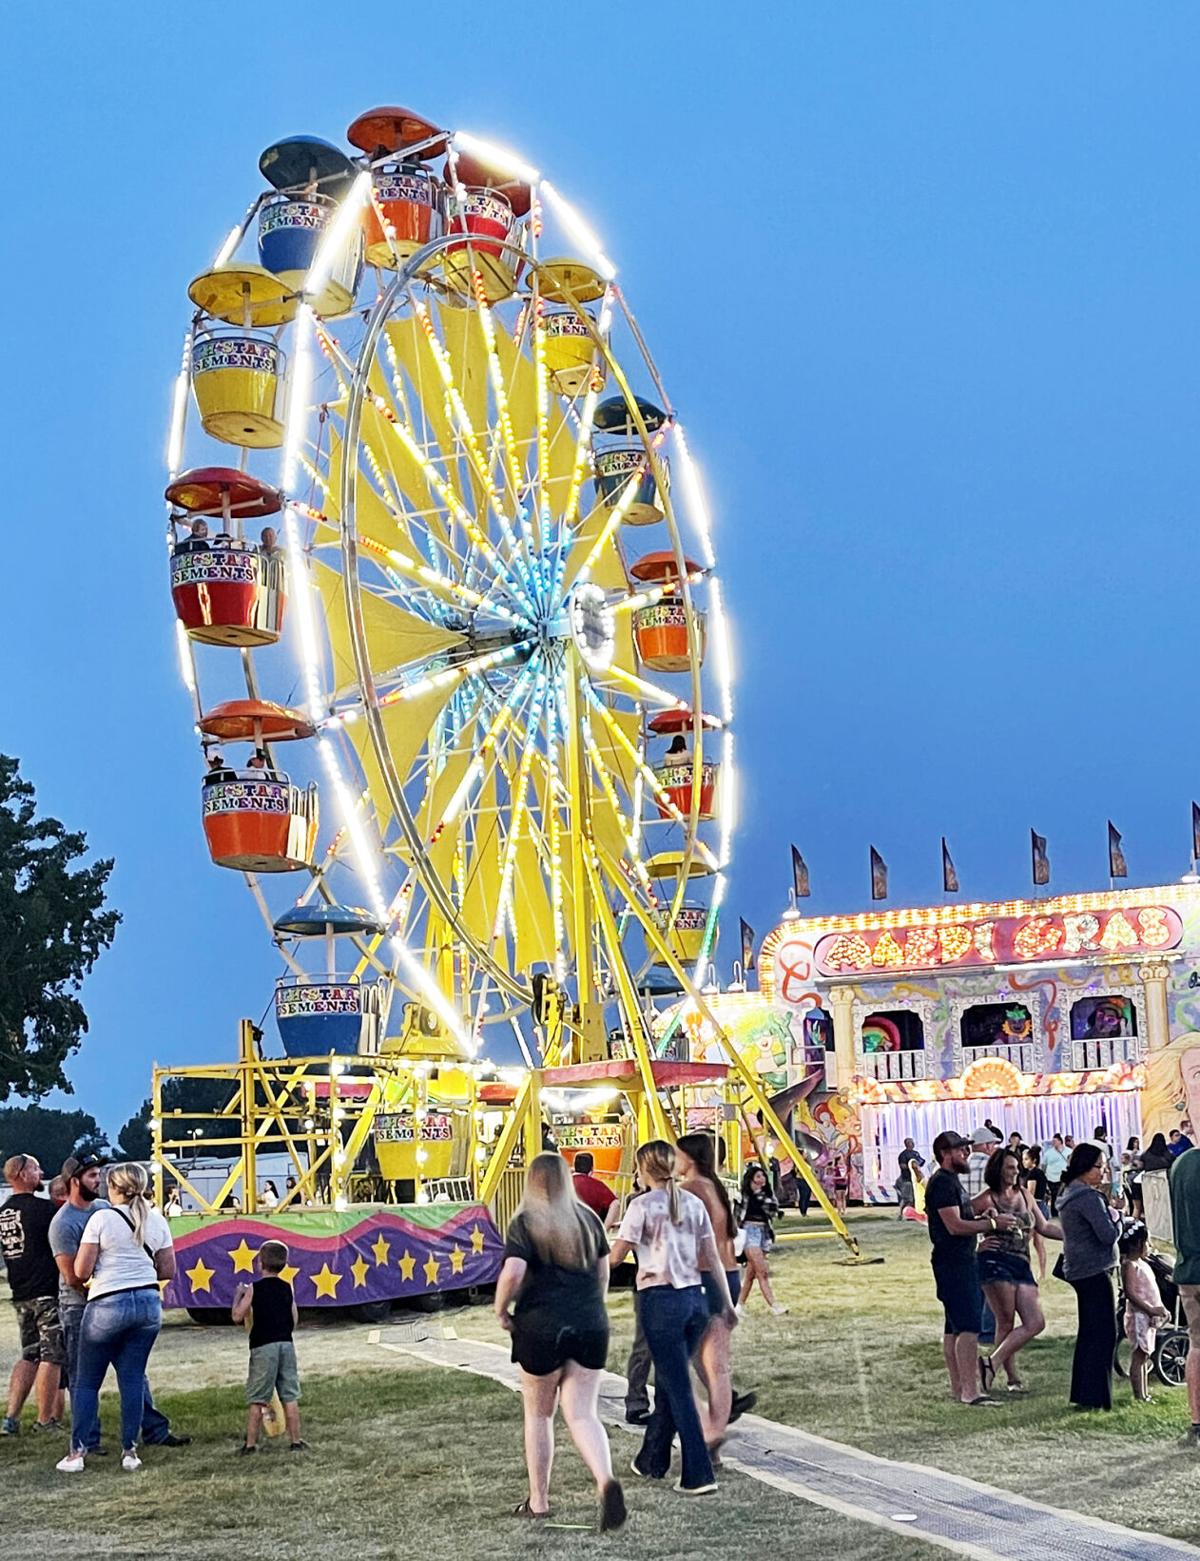 North Star Amusement confirmed to provide carnival at Richland County